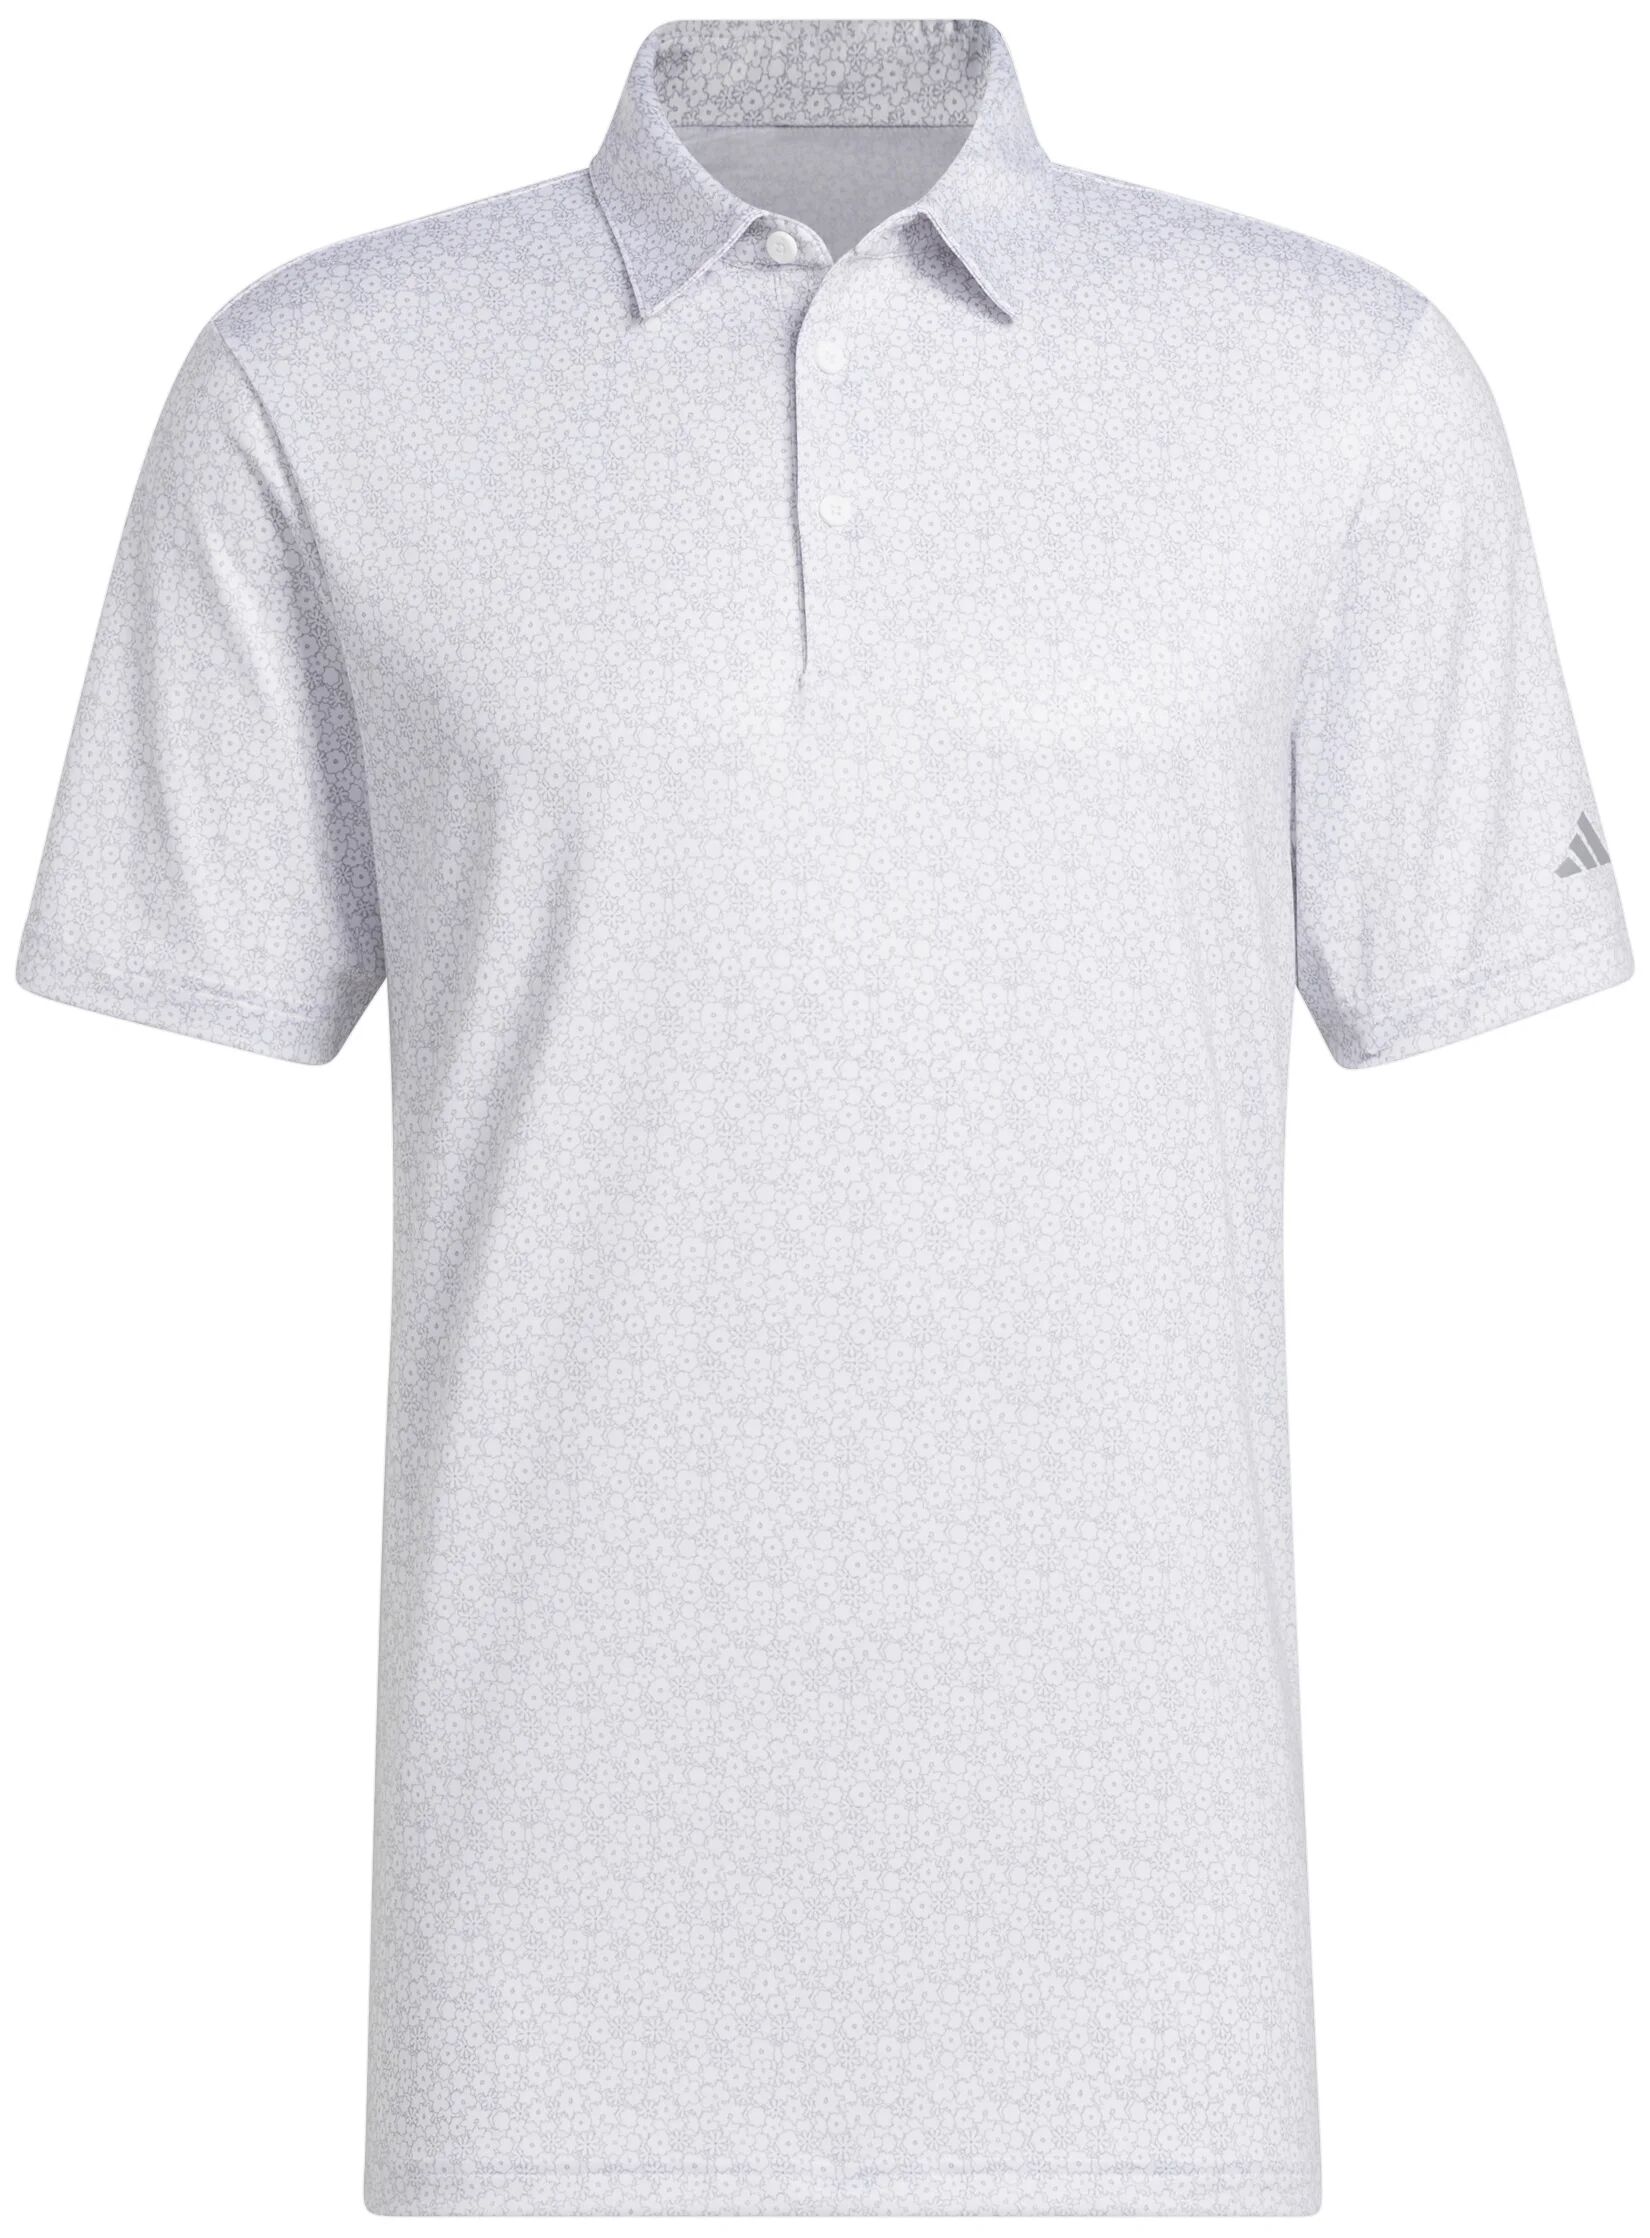 adidas Ultimate 365 Allover Print Men's Golf Polo Shirt - White, Size: X-Large